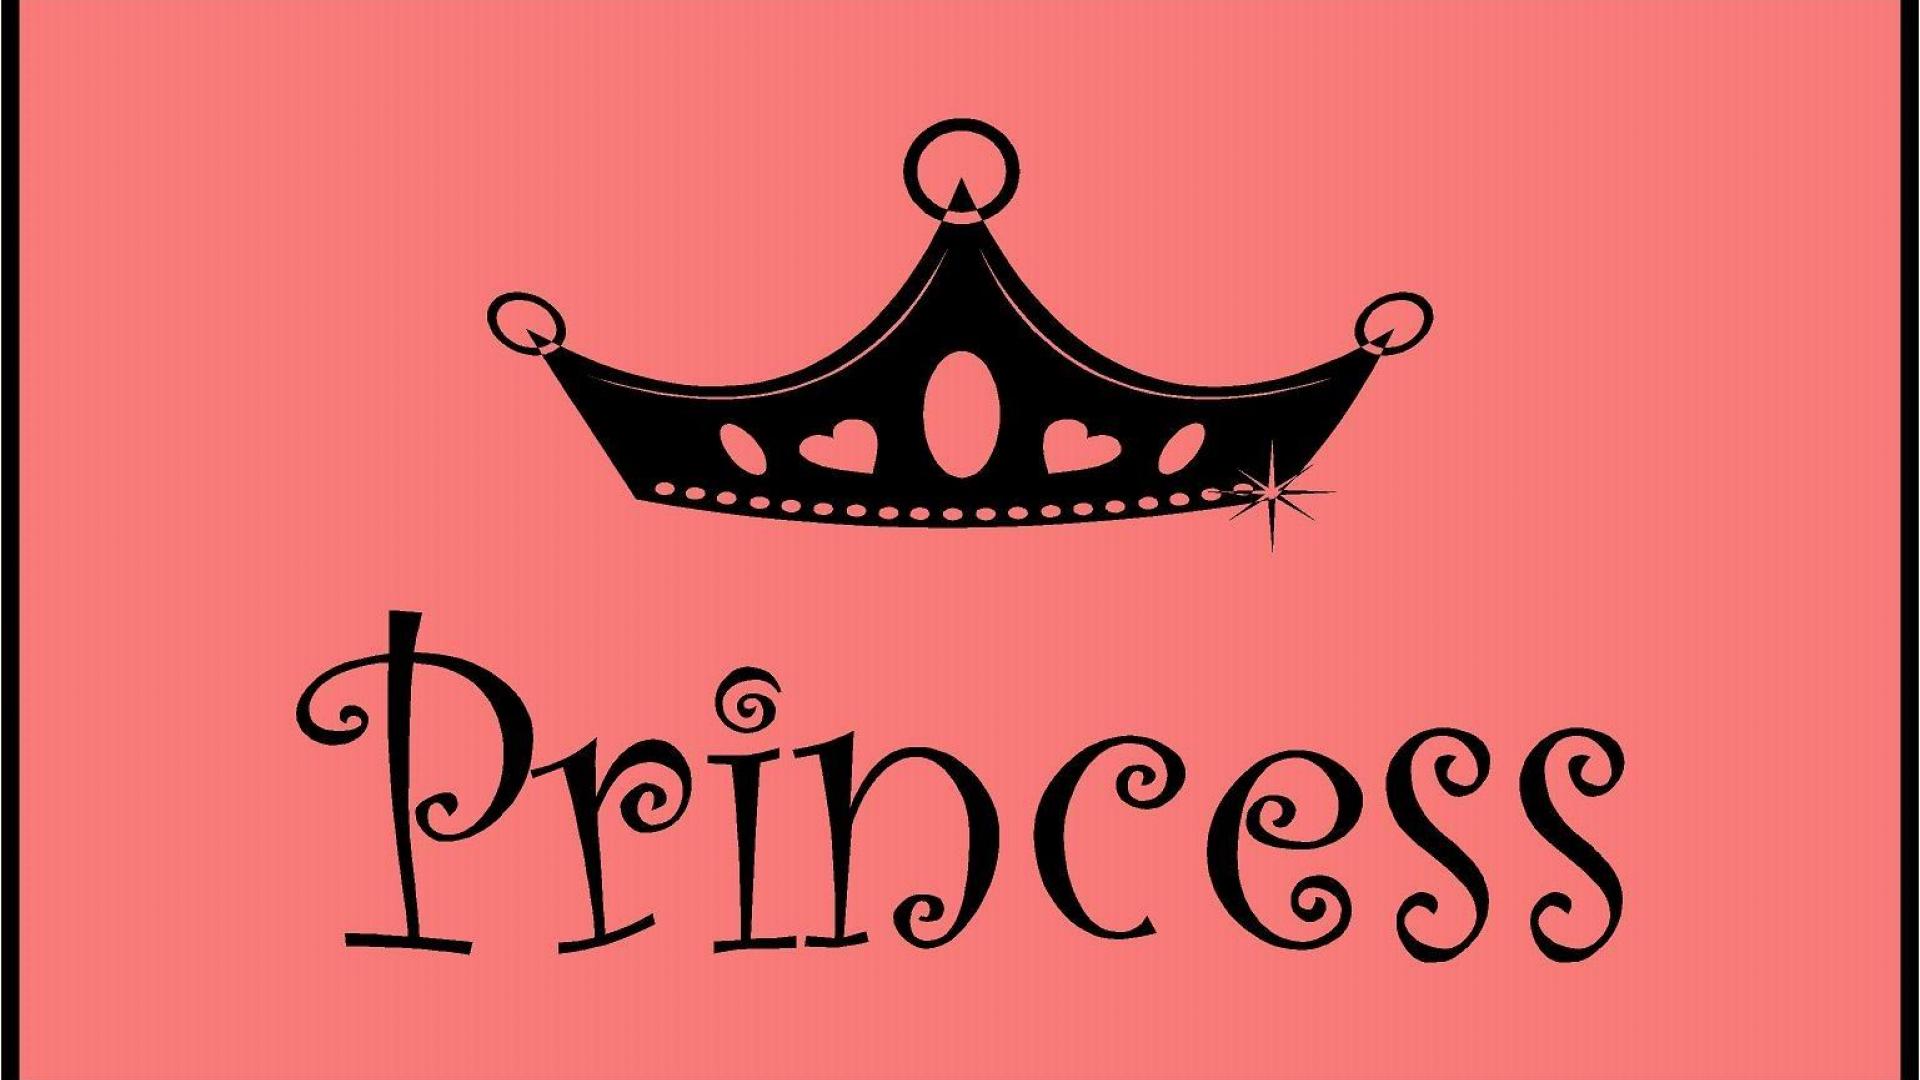 Princess - High Quality and Resolution Wallpapers